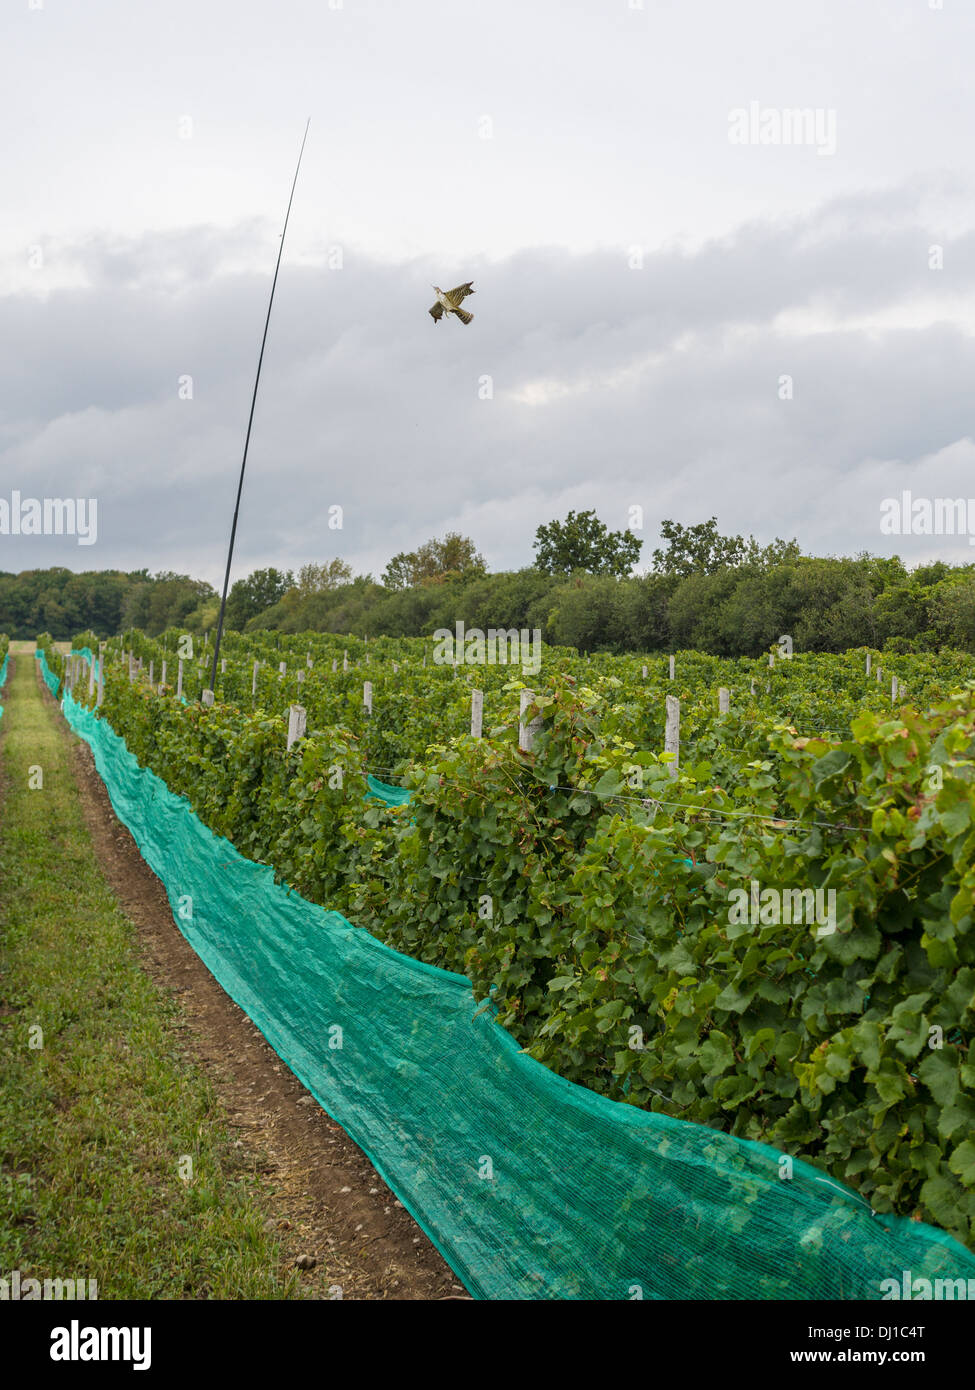 Hawk Shaped Kite Protecting the Grape Vineyard. A Kite shaped like a hawk and attached to a string flies high above a vineyard. Stock Photo